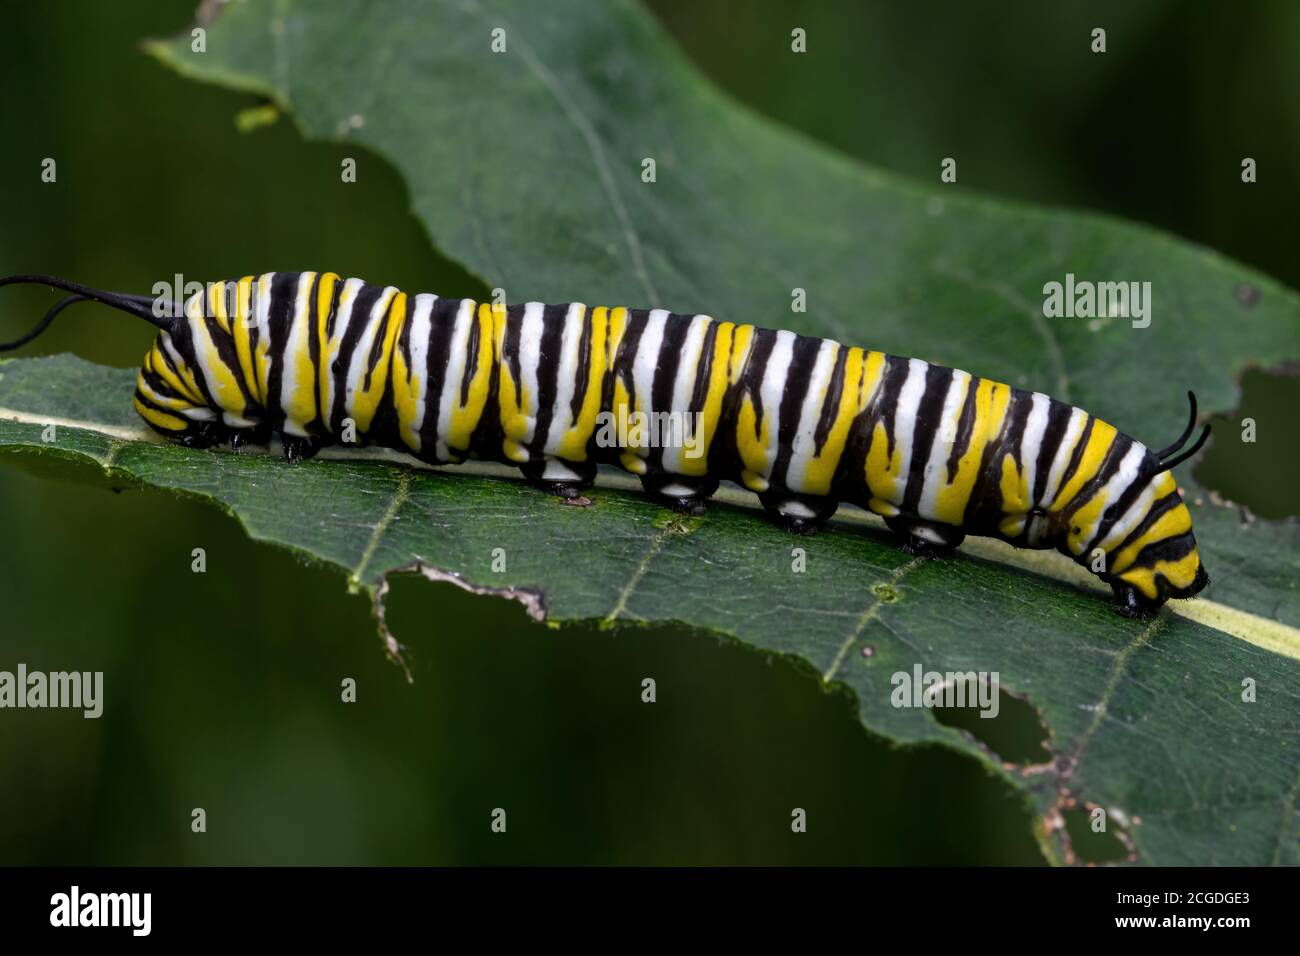 Monarch butterfly caterpillar on milkweed leaf. It is a milkweed butterfly in the family Nymphalidae and is threatened by habitat loss in the USA. Stock Photo